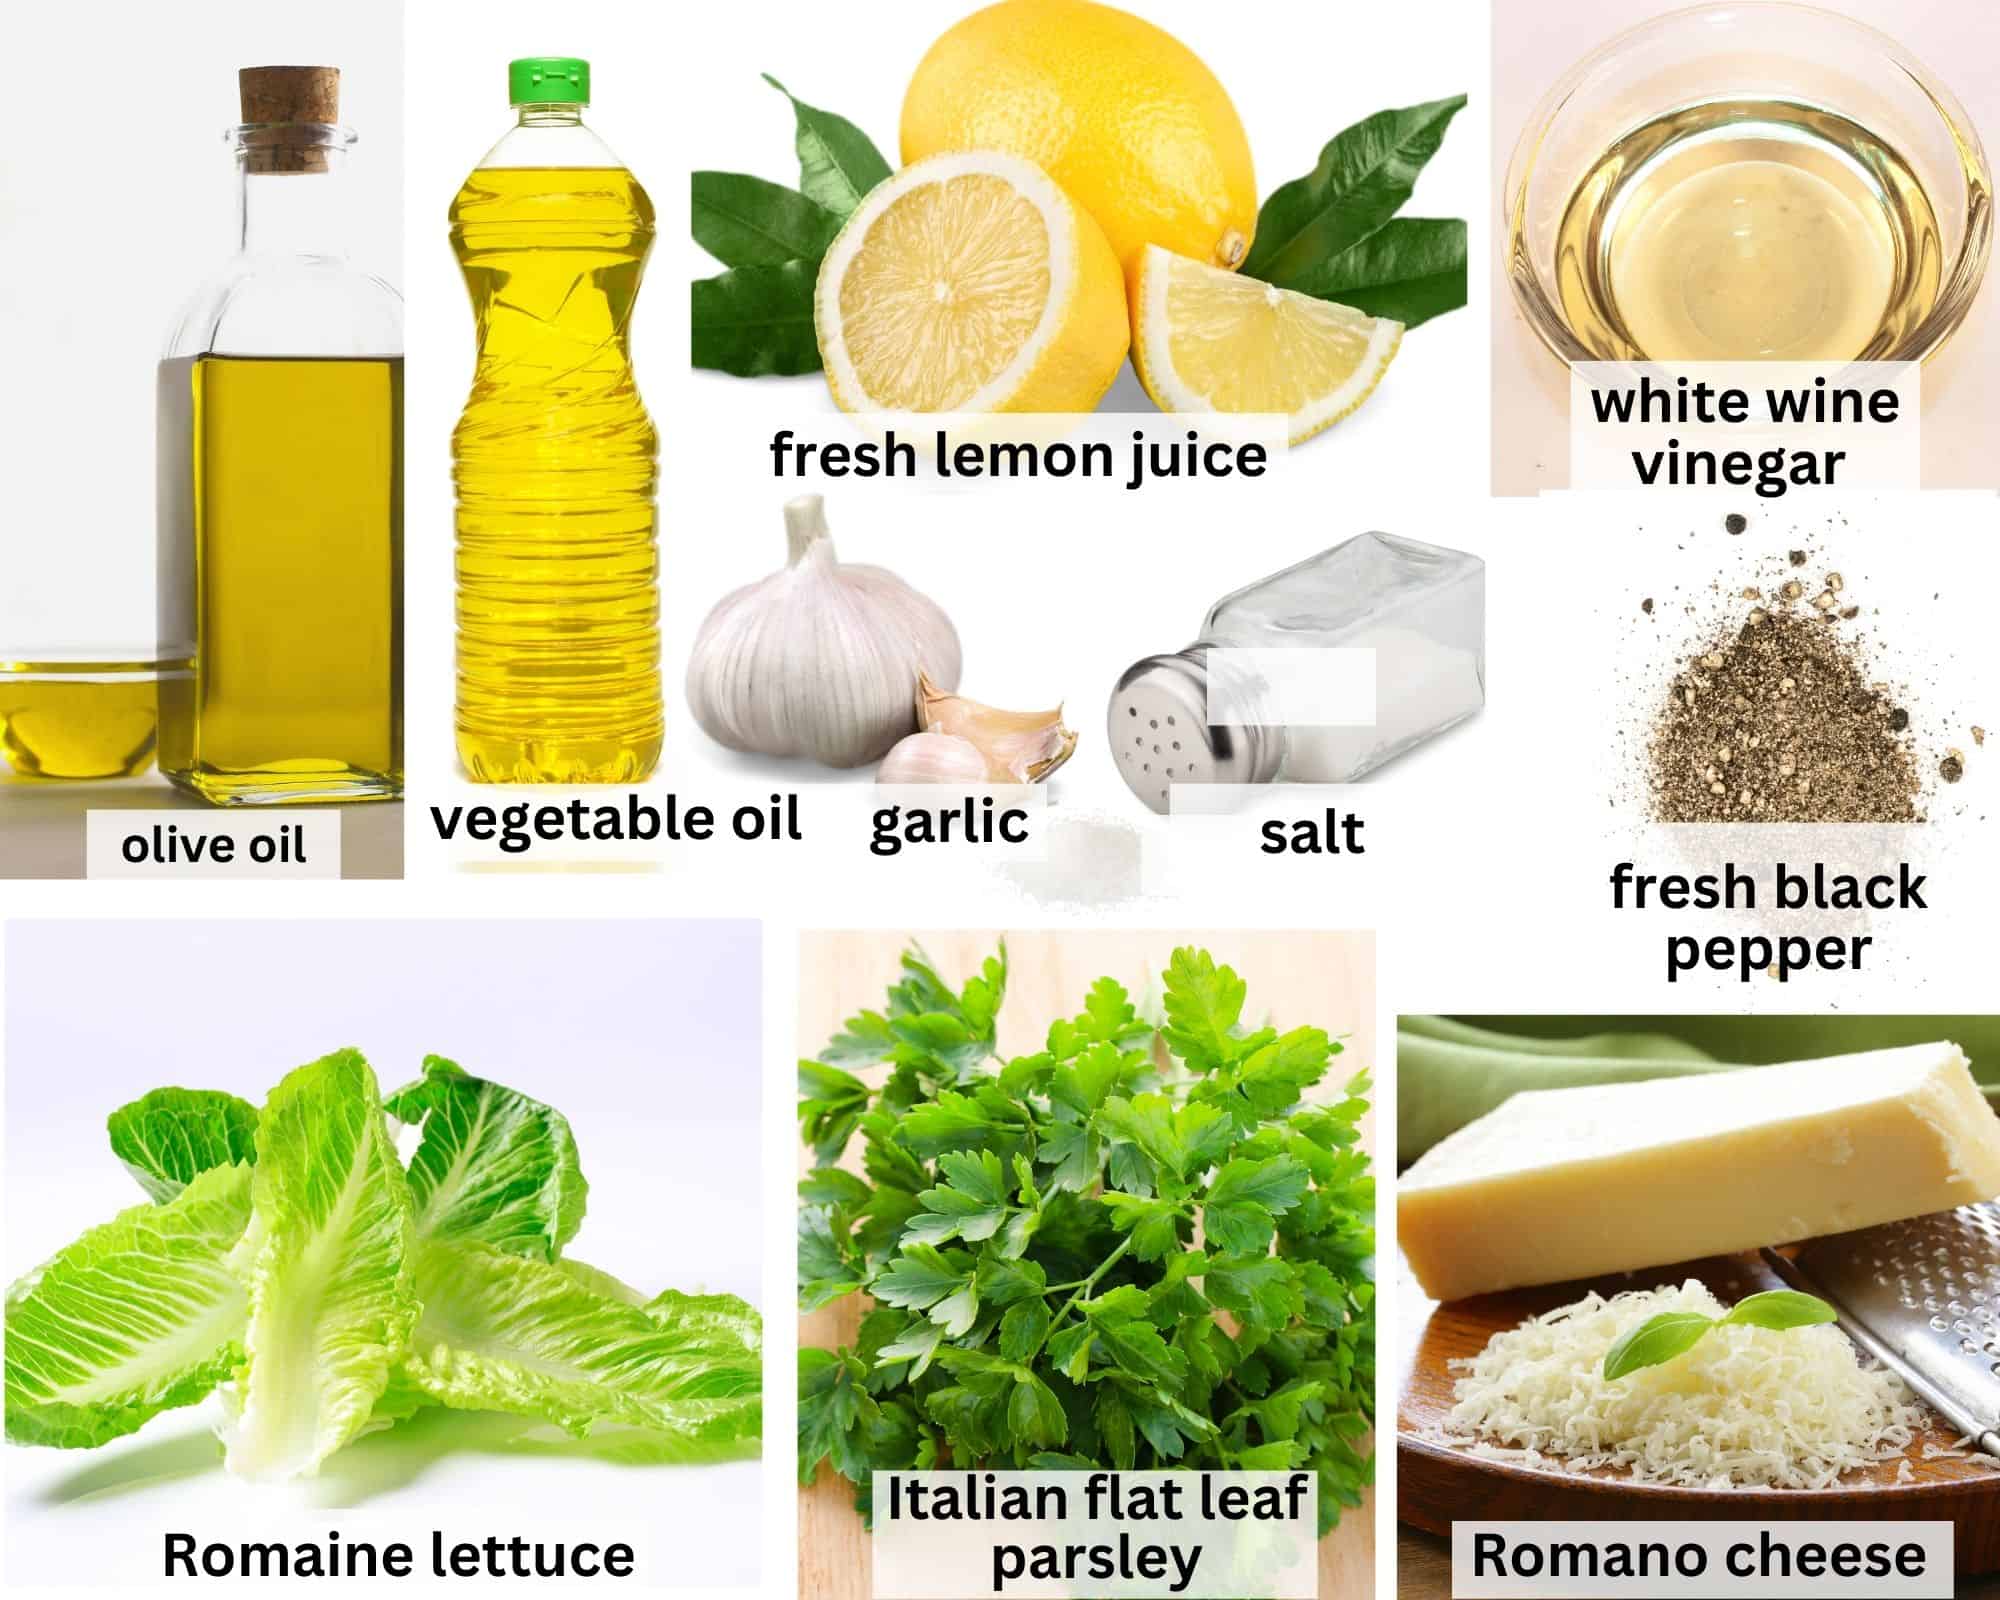 Ingredients needed to create Lousiana famous sensation salad and sensation salad dressing.